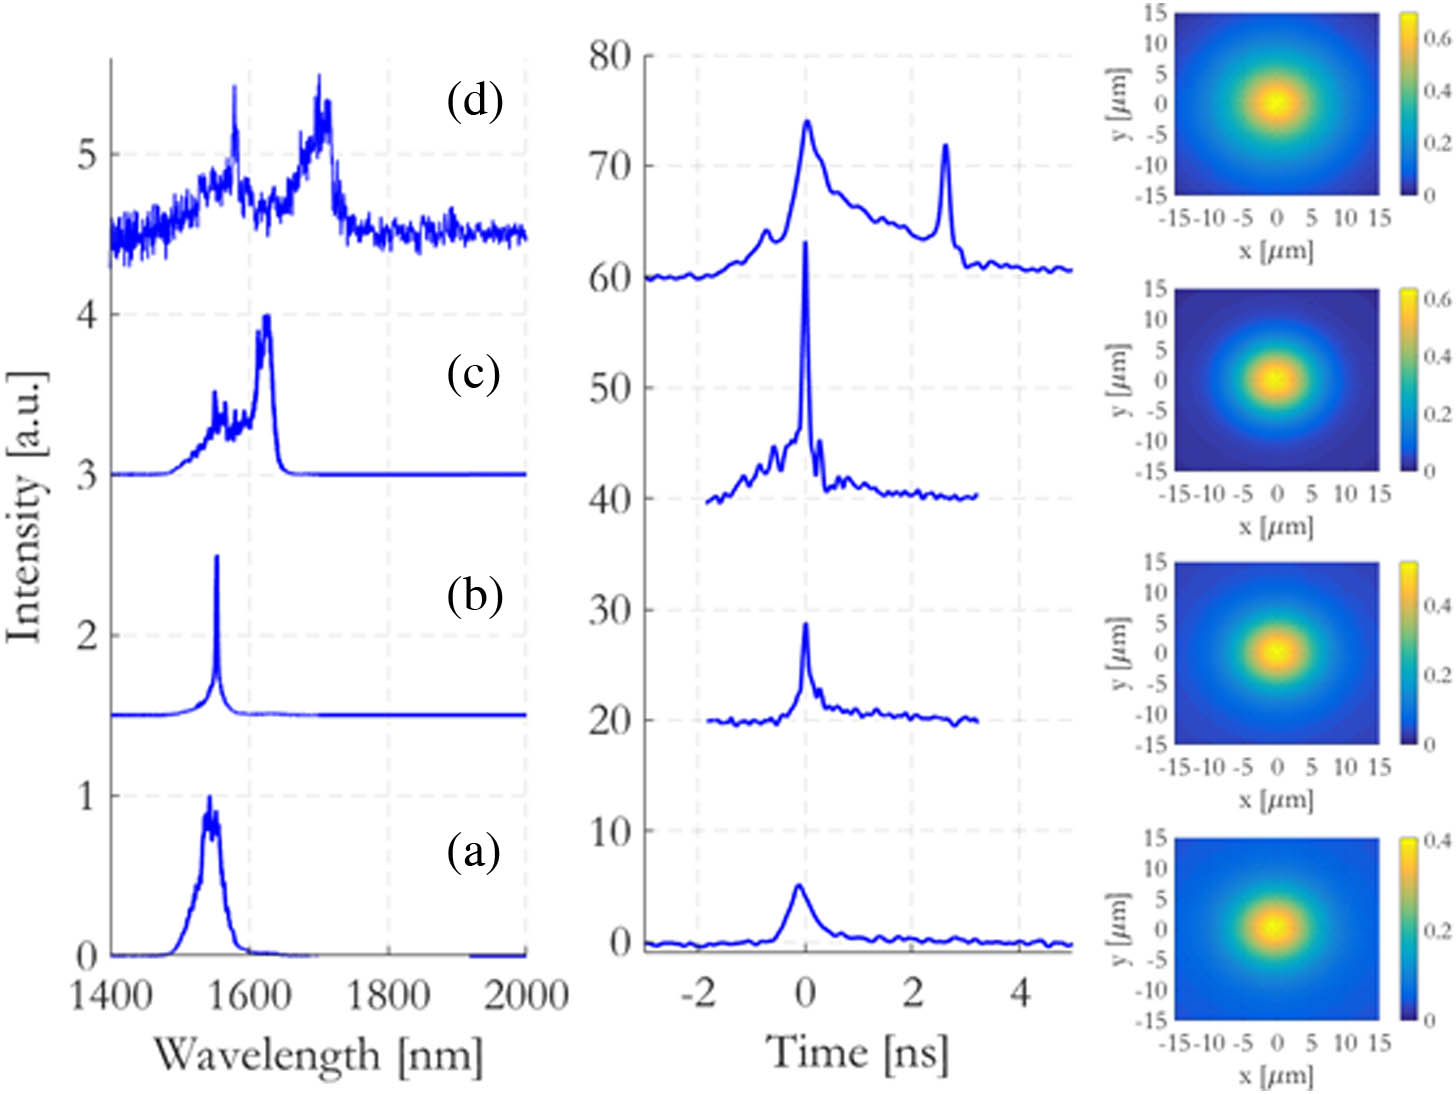 Measured output spectra (left column), photodiode traces (center column), and near-field (right column) at 1 km distance, for input pulse peak powers of (a) 2 kW, (b) 6.4 kW, (c) 15 kW, and (d) 110 kW (see Visualization 1).